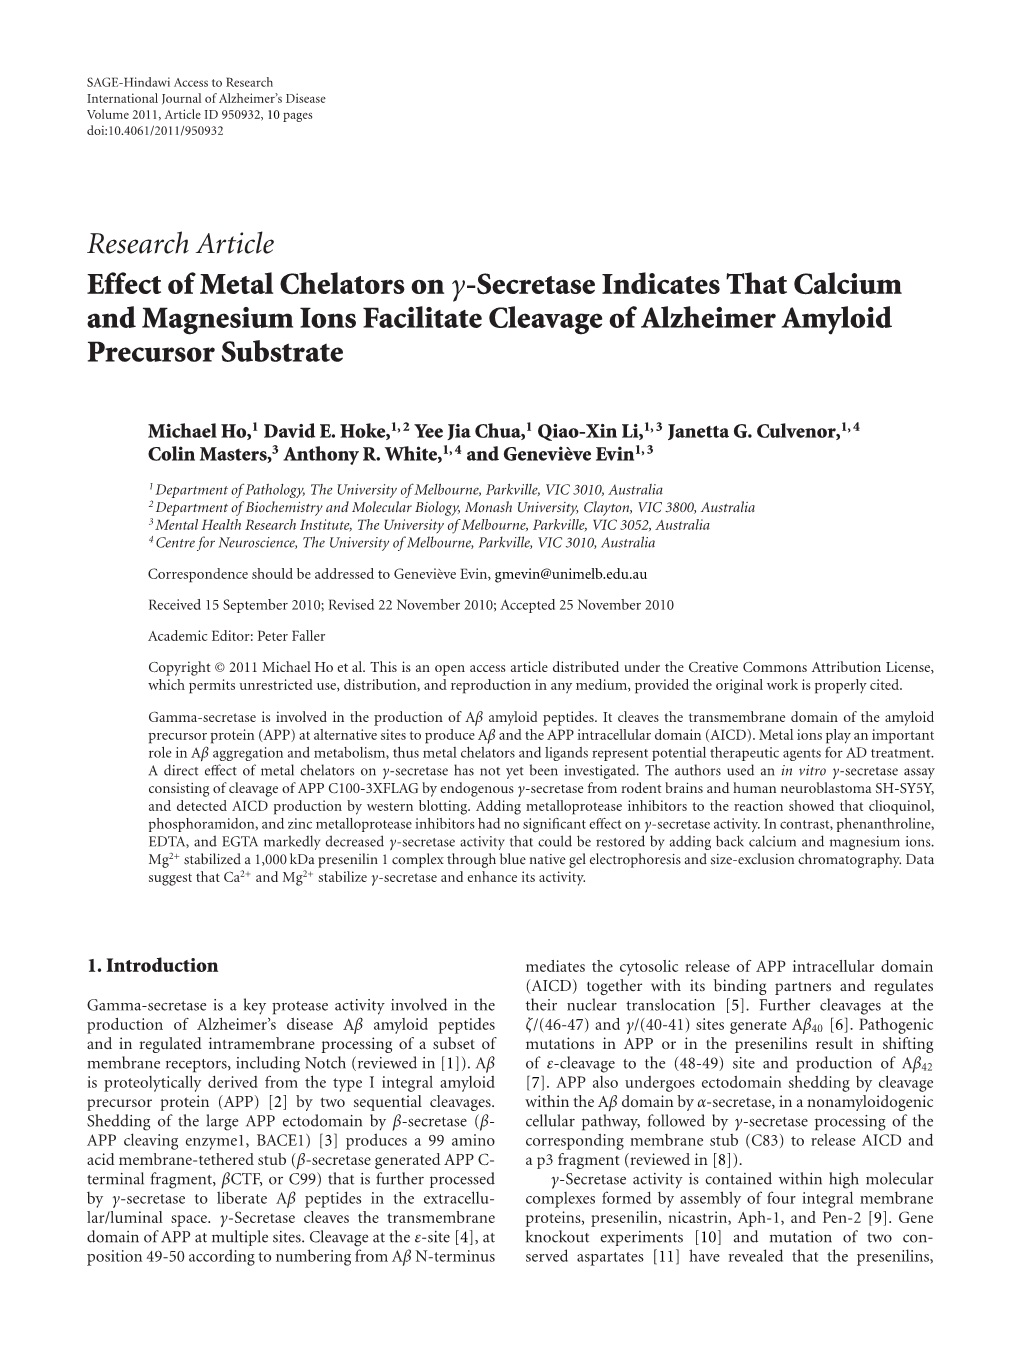 Research Article Effect of Metal Chelators on Γ-Secretase Indicates That Calcium and Magnesium Ions Facilitate Cleavage of Alzheimer Amyloid Precursor Substrate